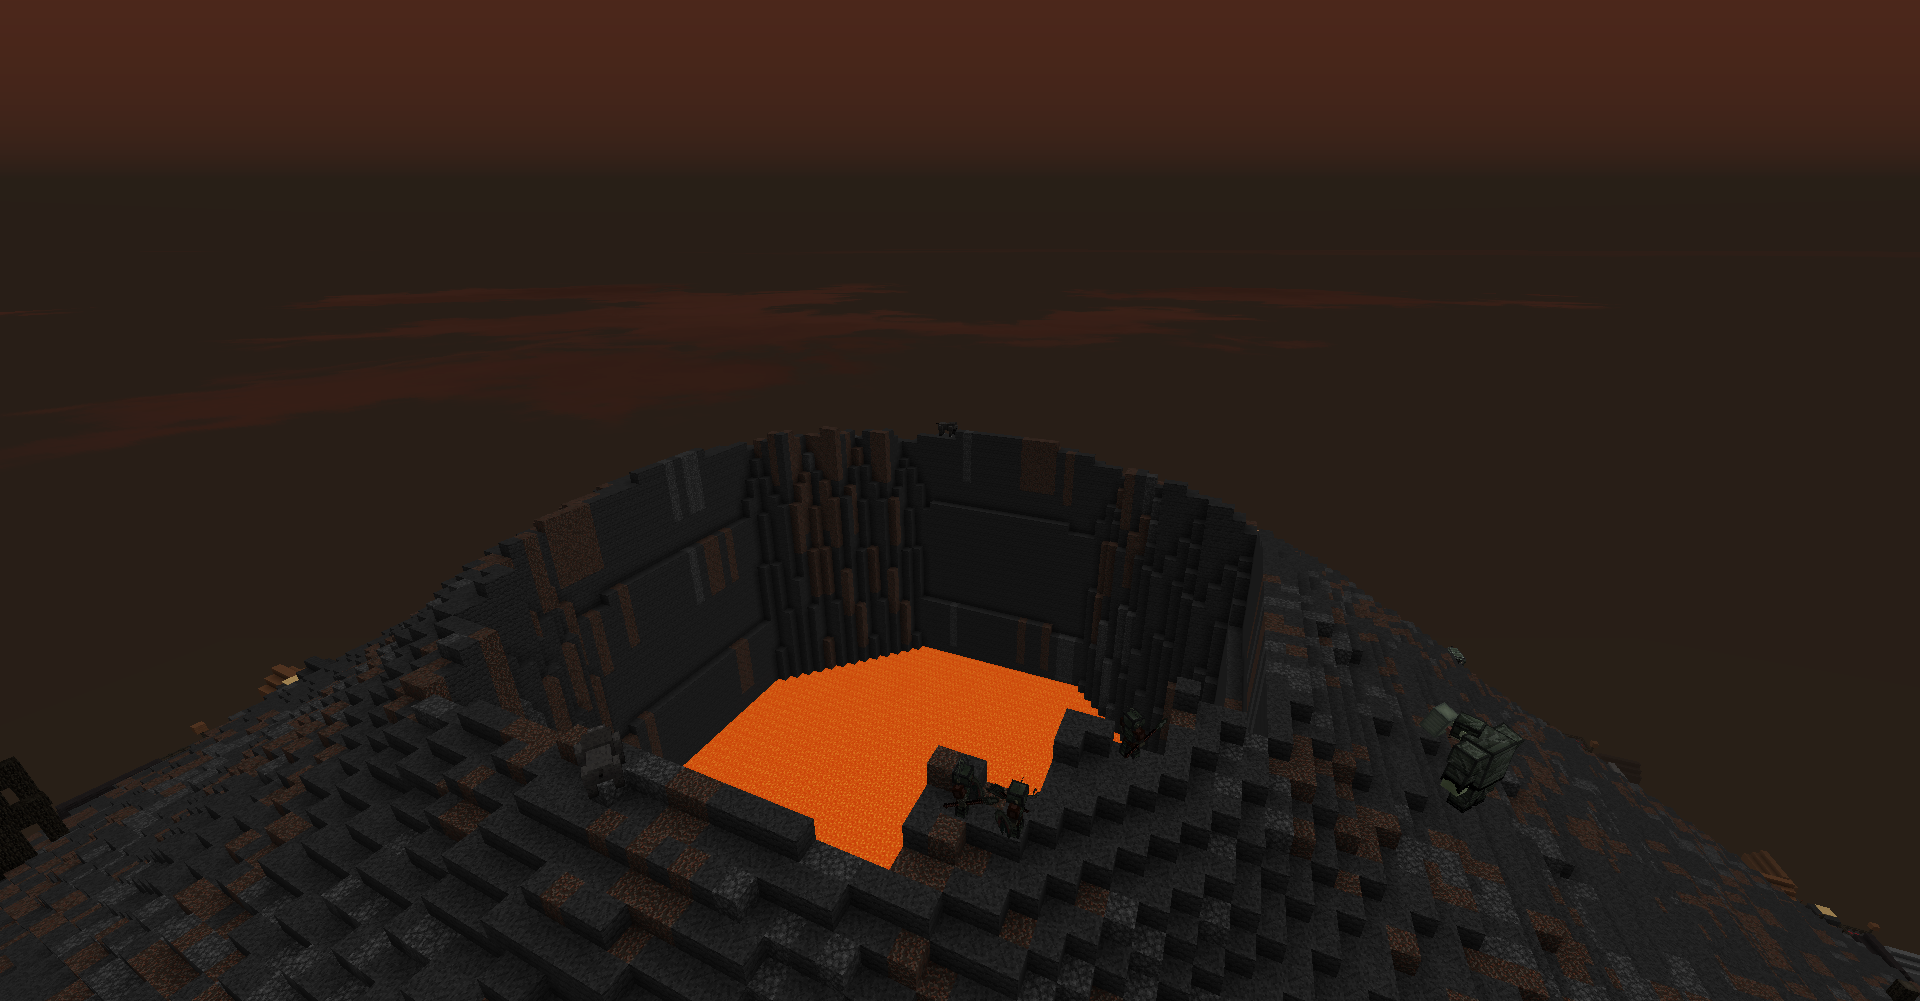 lord of the rings minecraft mordor